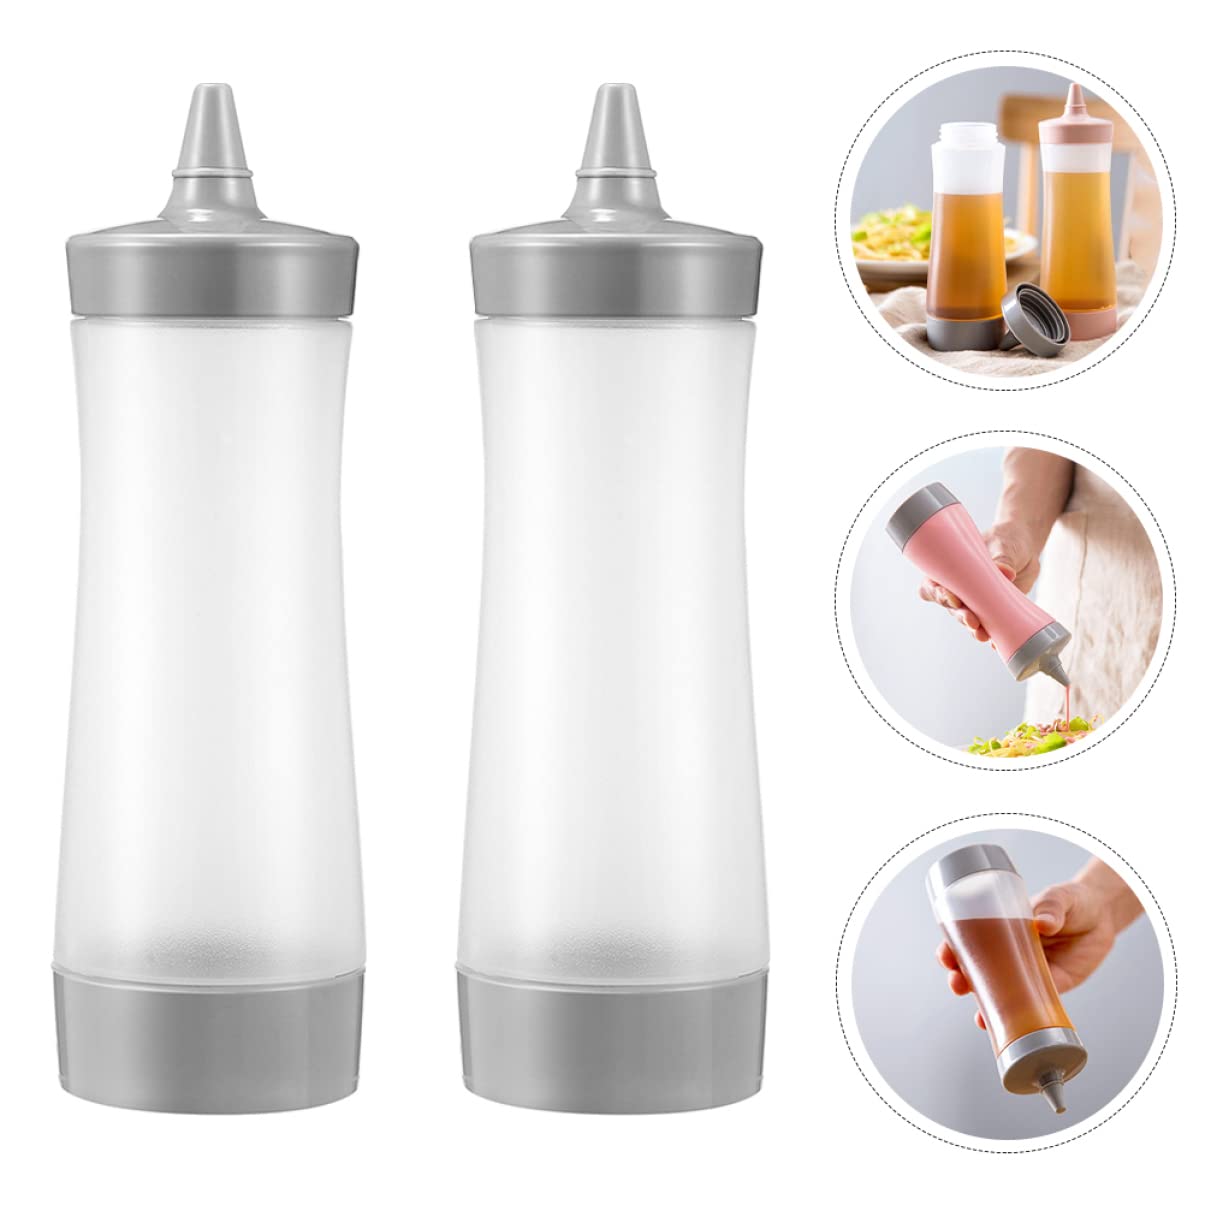 8 Pcs Squeeze Bottle Dressing Bottles Hair Dye Bottle Squeezy Sauce Bottle Hot Sauce Bottle Cookie Containers with Lids Salad Bottle Squeeze Honey Bottle Ketchup Mustard Plastic